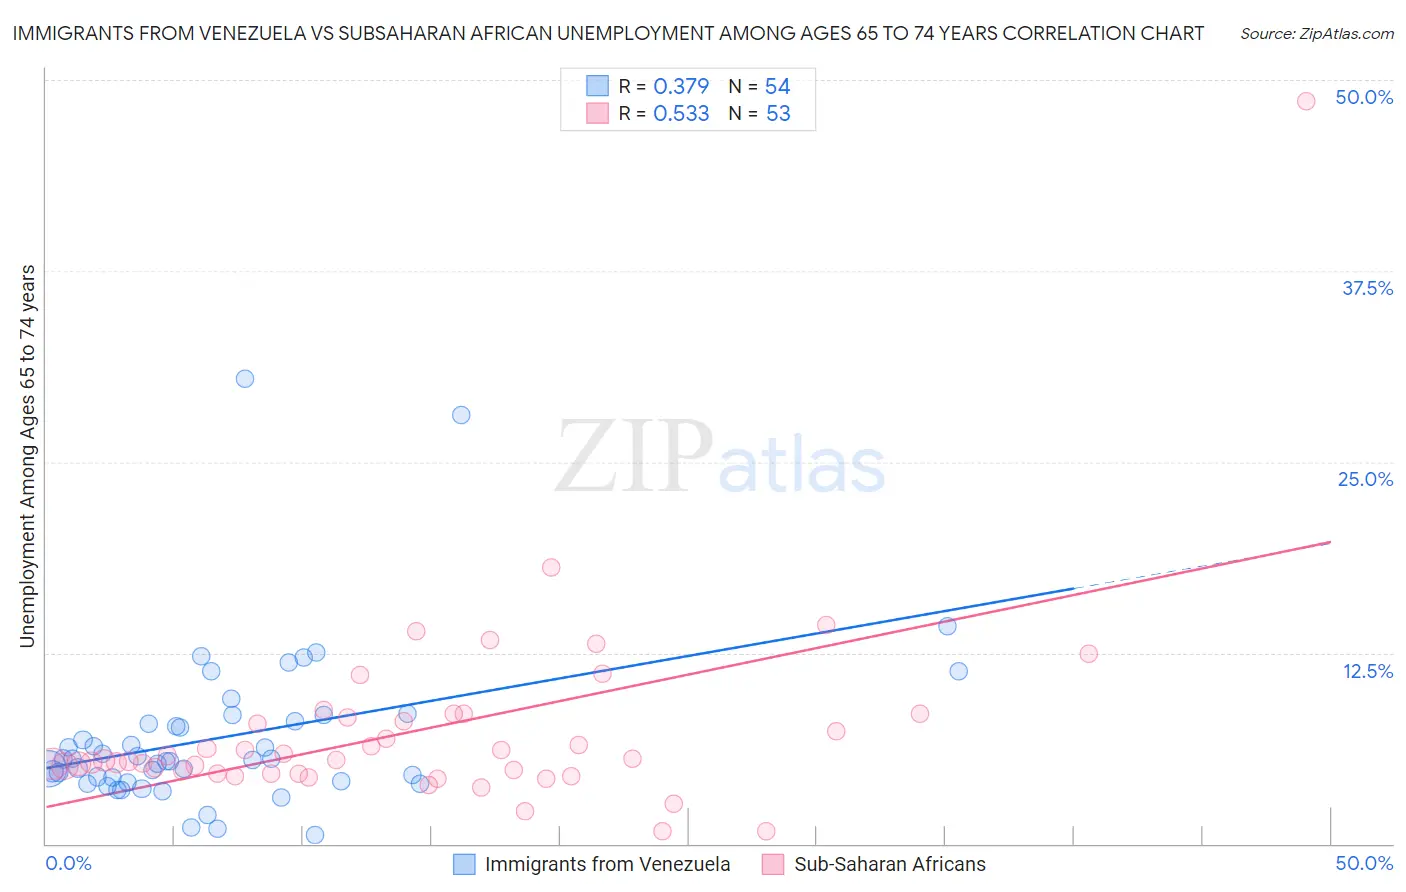 Immigrants from Venezuela vs Subsaharan African Unemployment Among Ages 65 to 74 years